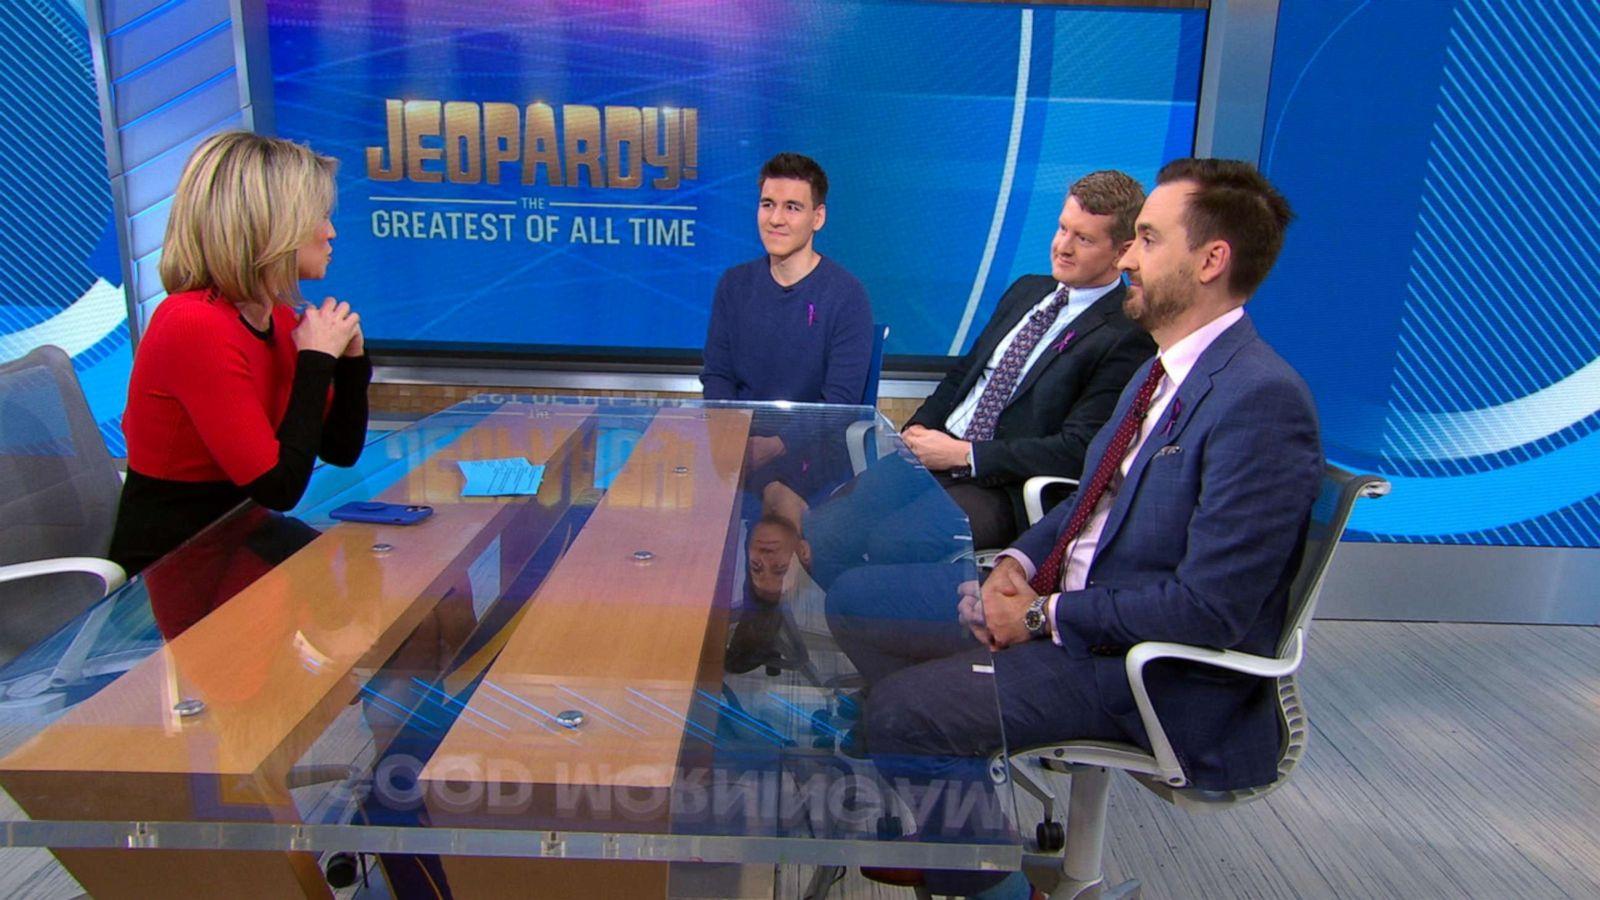 'Jeopardy!' greats reveal how they're preparing before